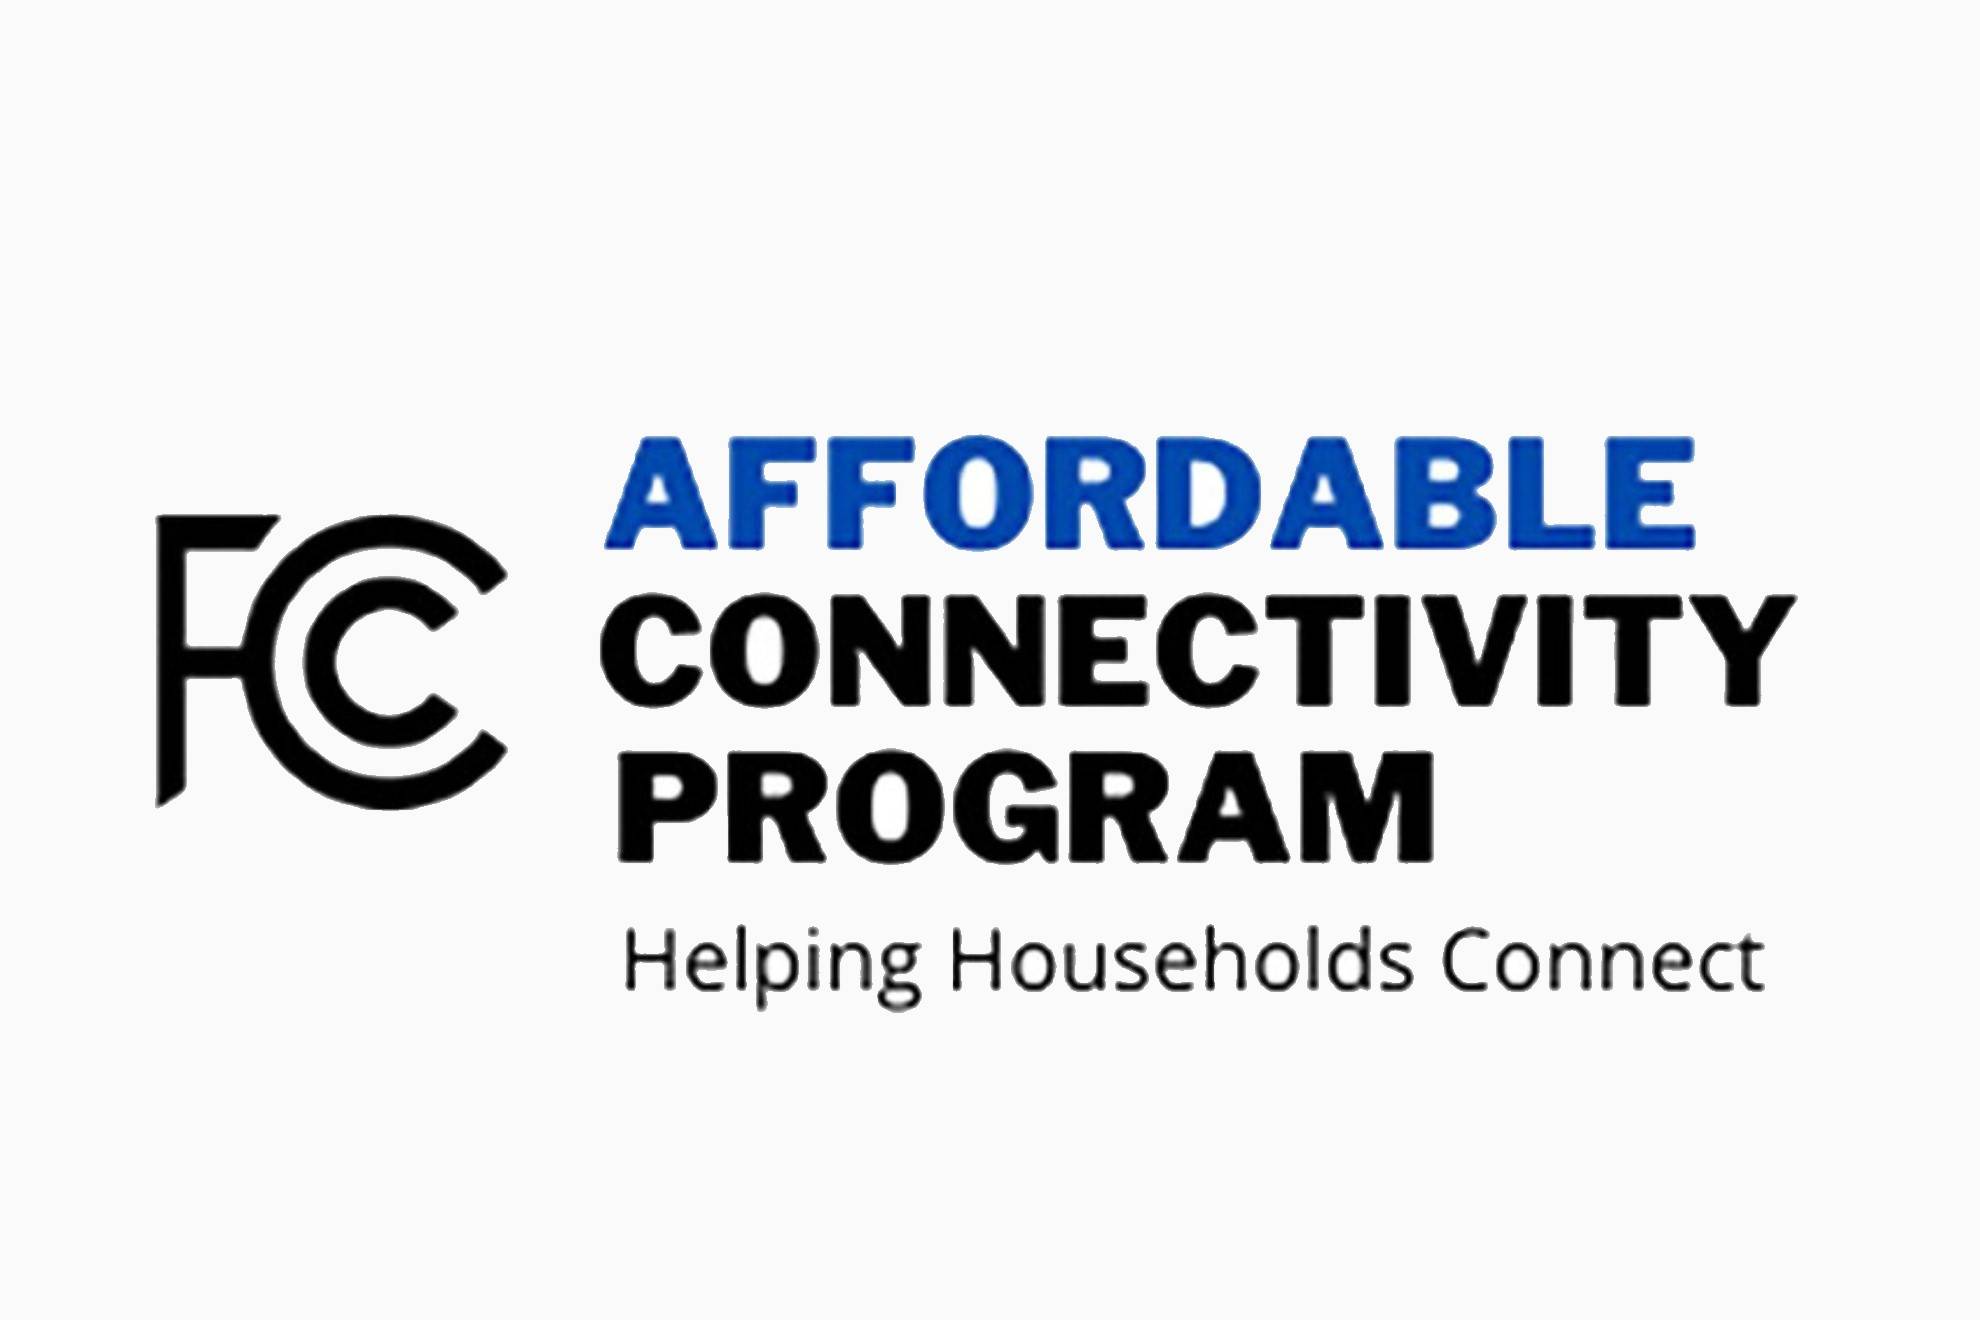 Join the Affordable Connectivity Program (ACP) – Supporting Low-Income Households with Broadband Access